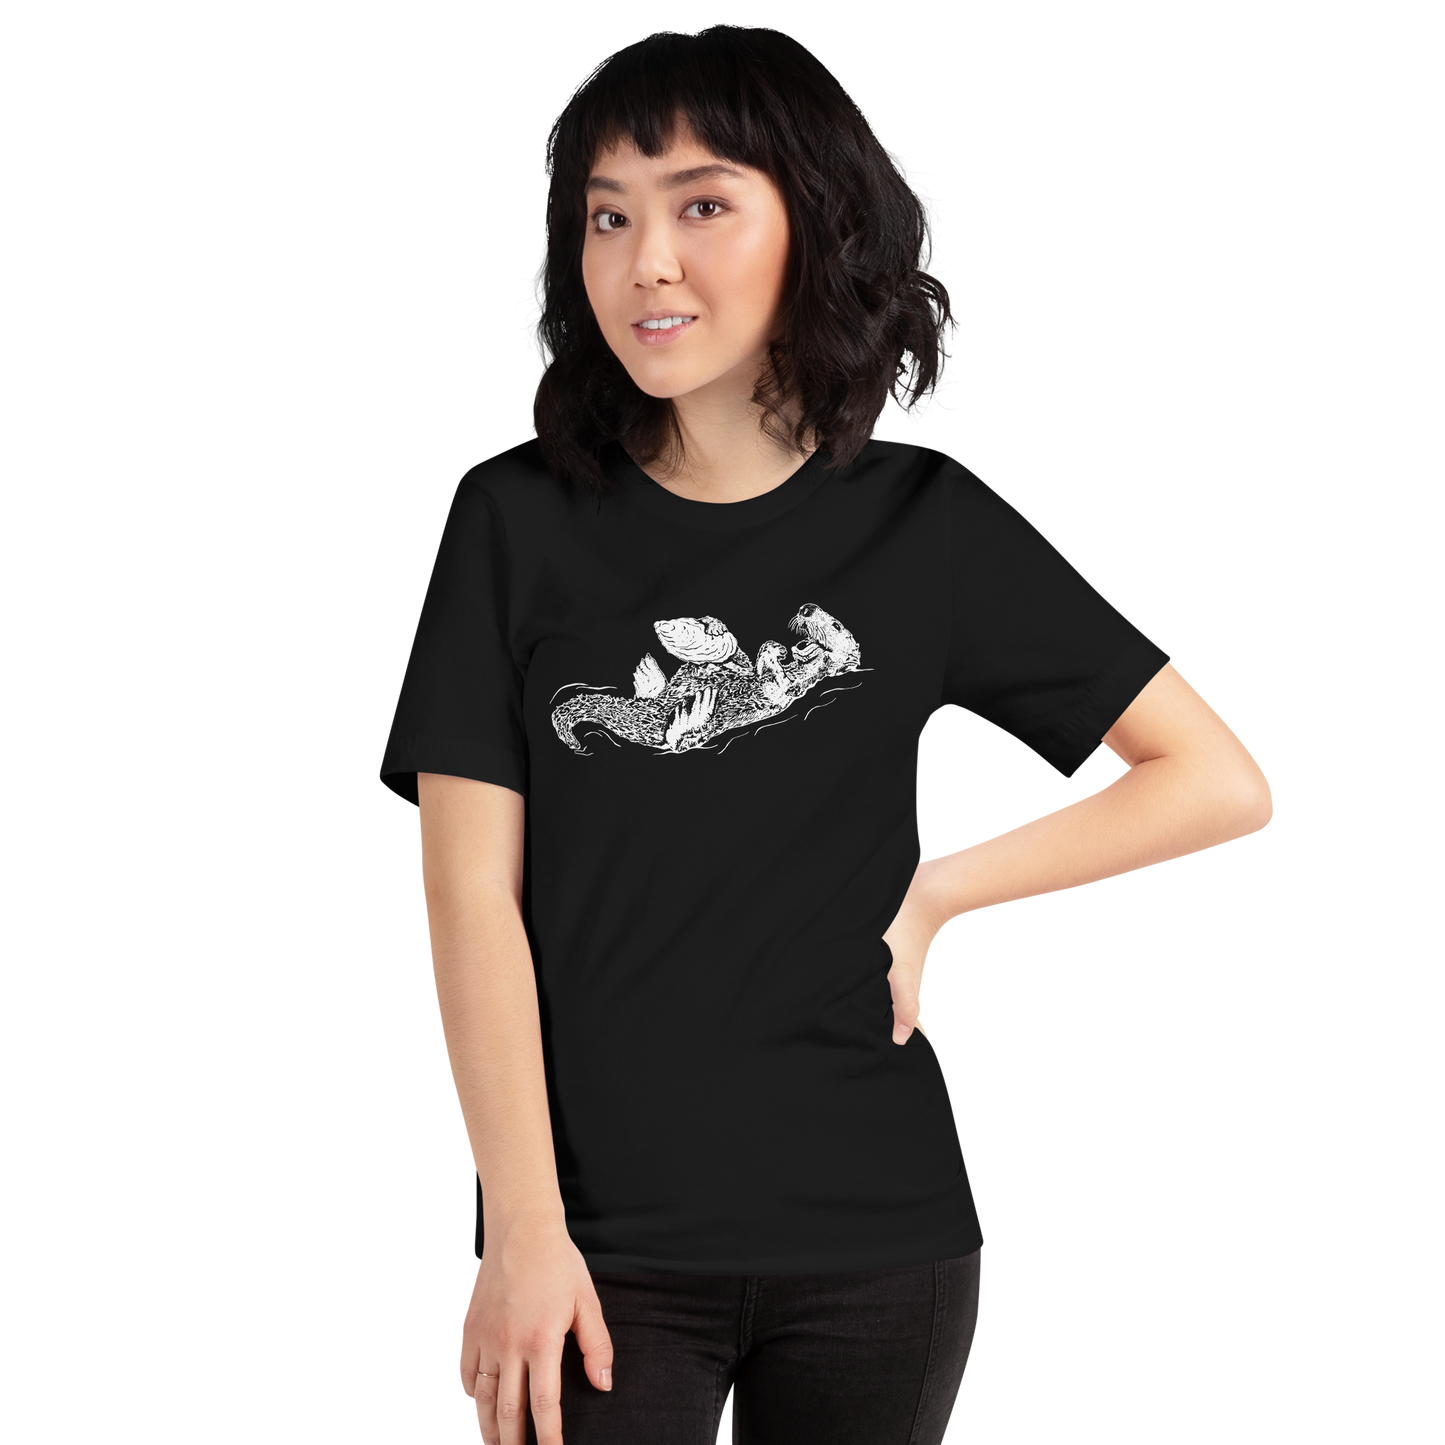 Sea Otter with Oyster - Unisex Staple T-Shirt - Bella + Canvas 3001